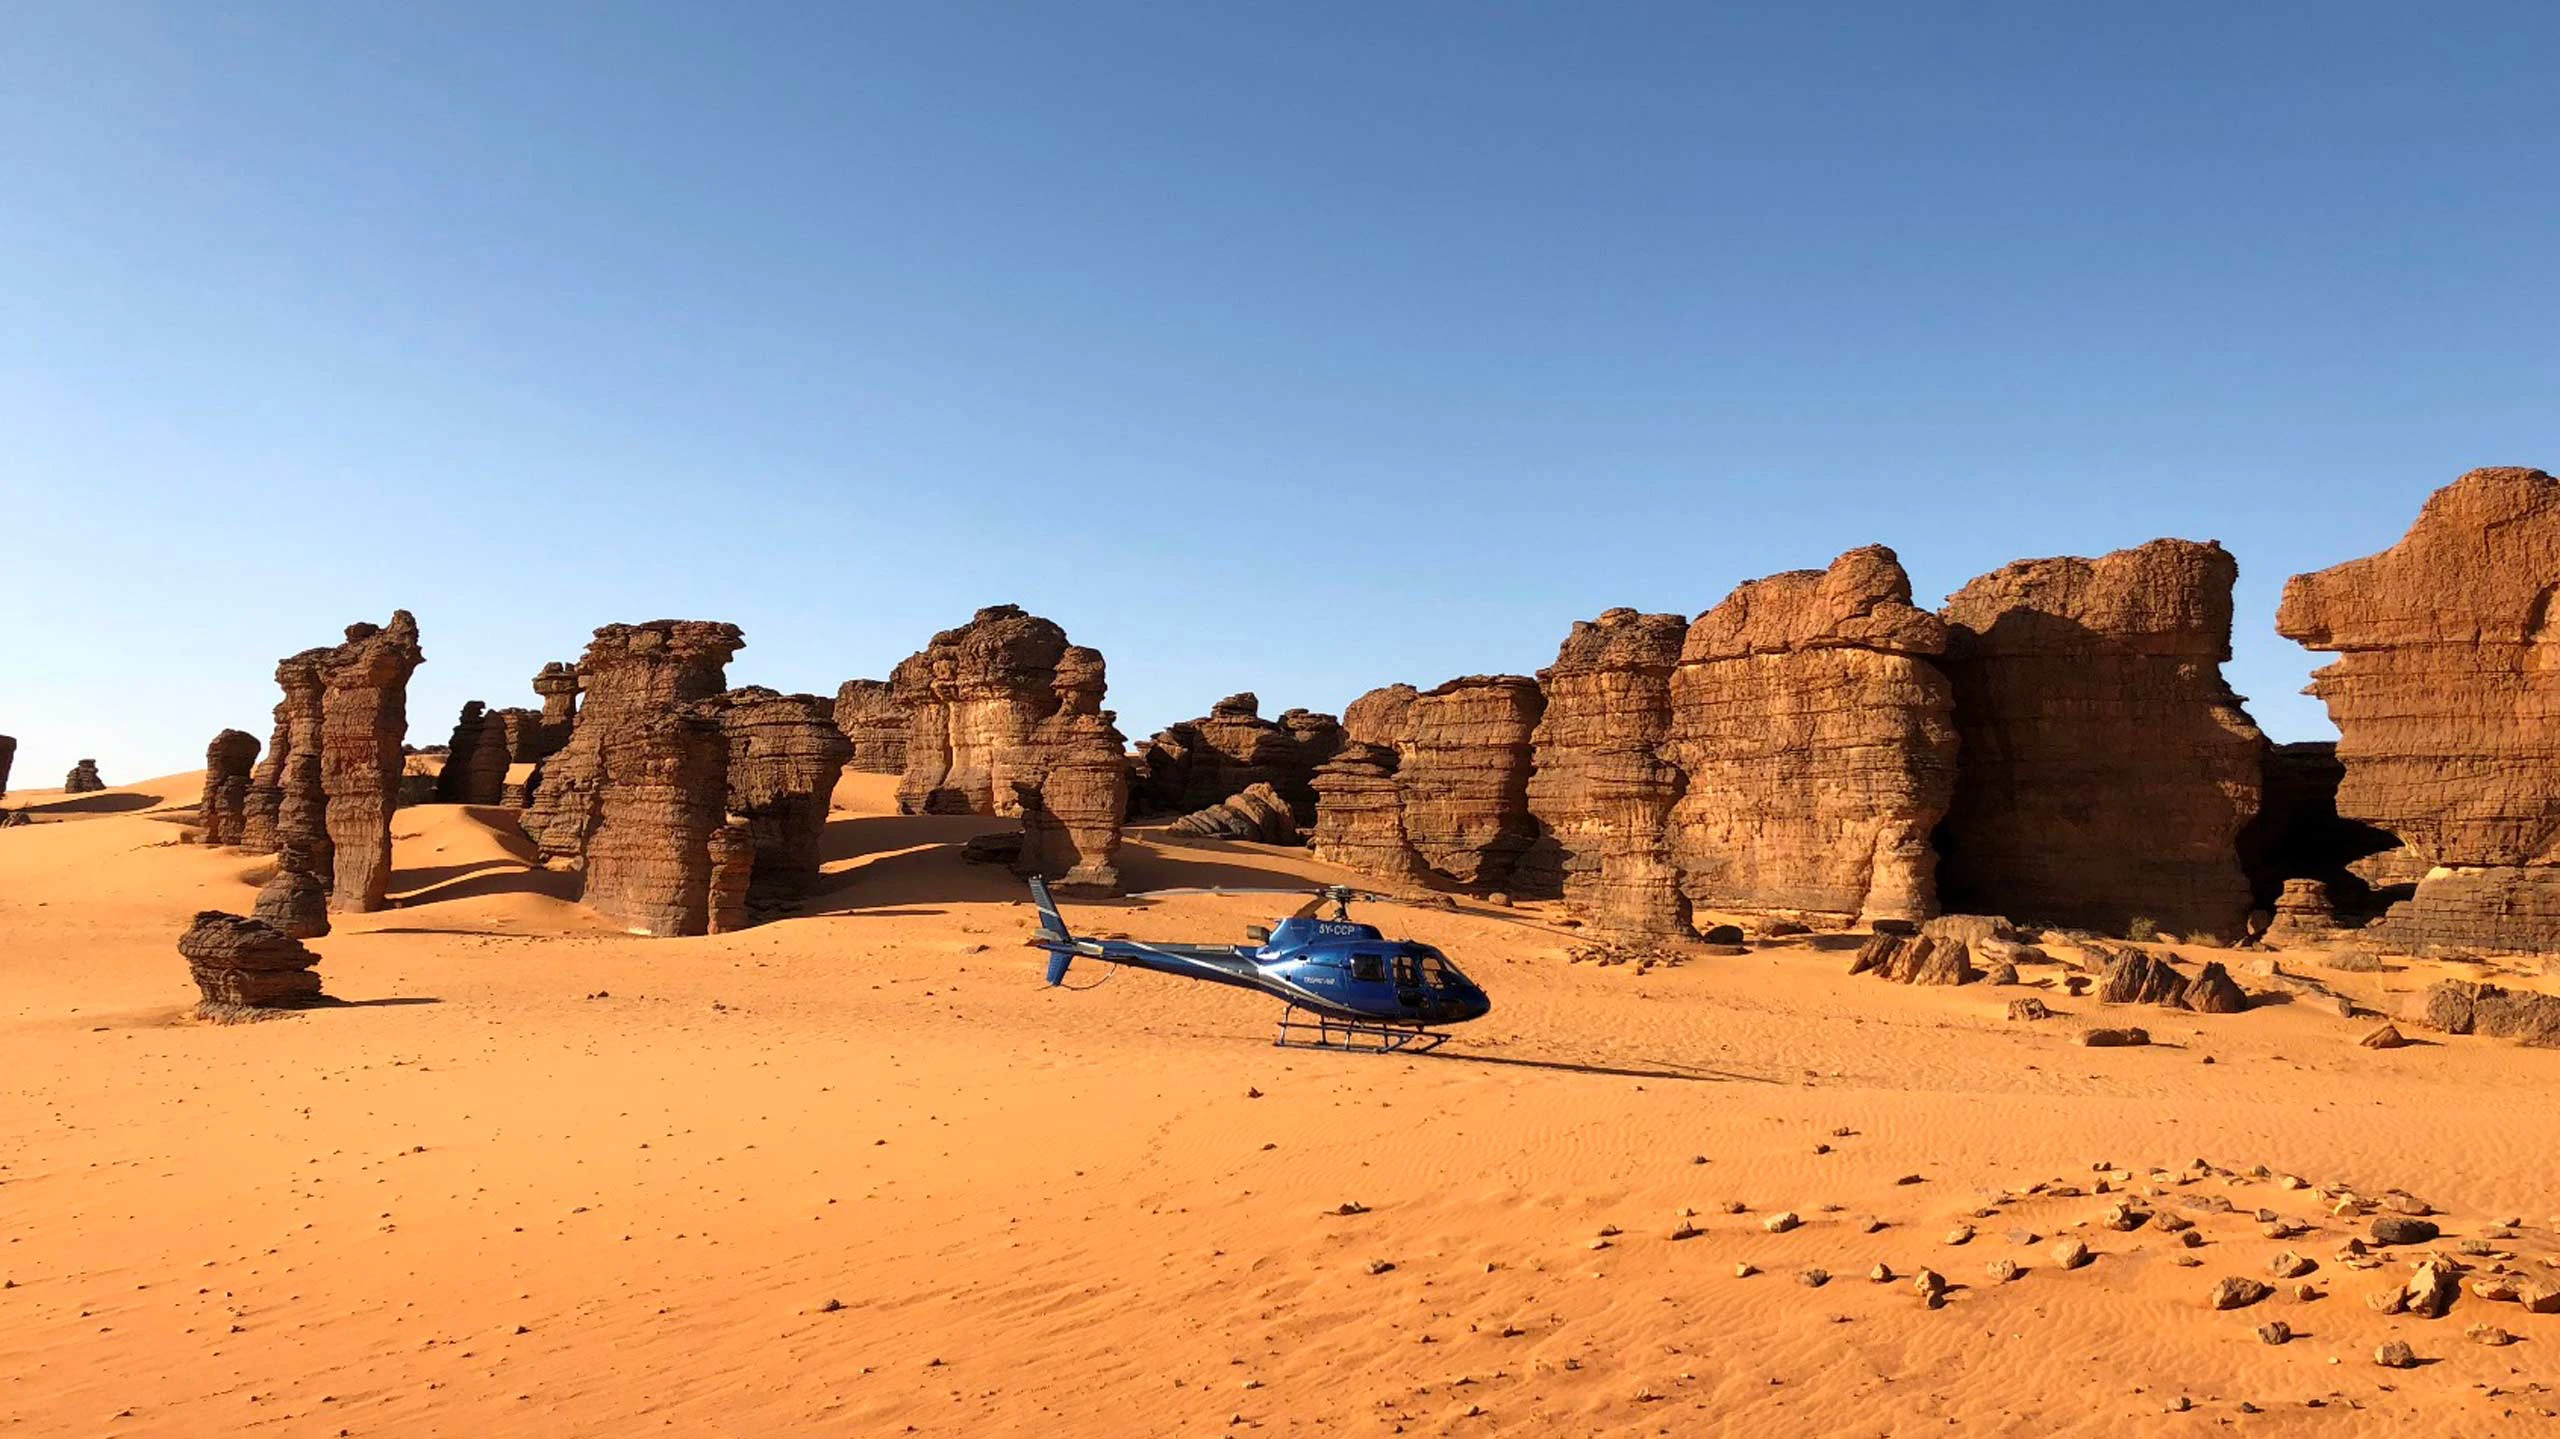 Helicopter safari over Ennedi and Tibesti Mountains in Chad